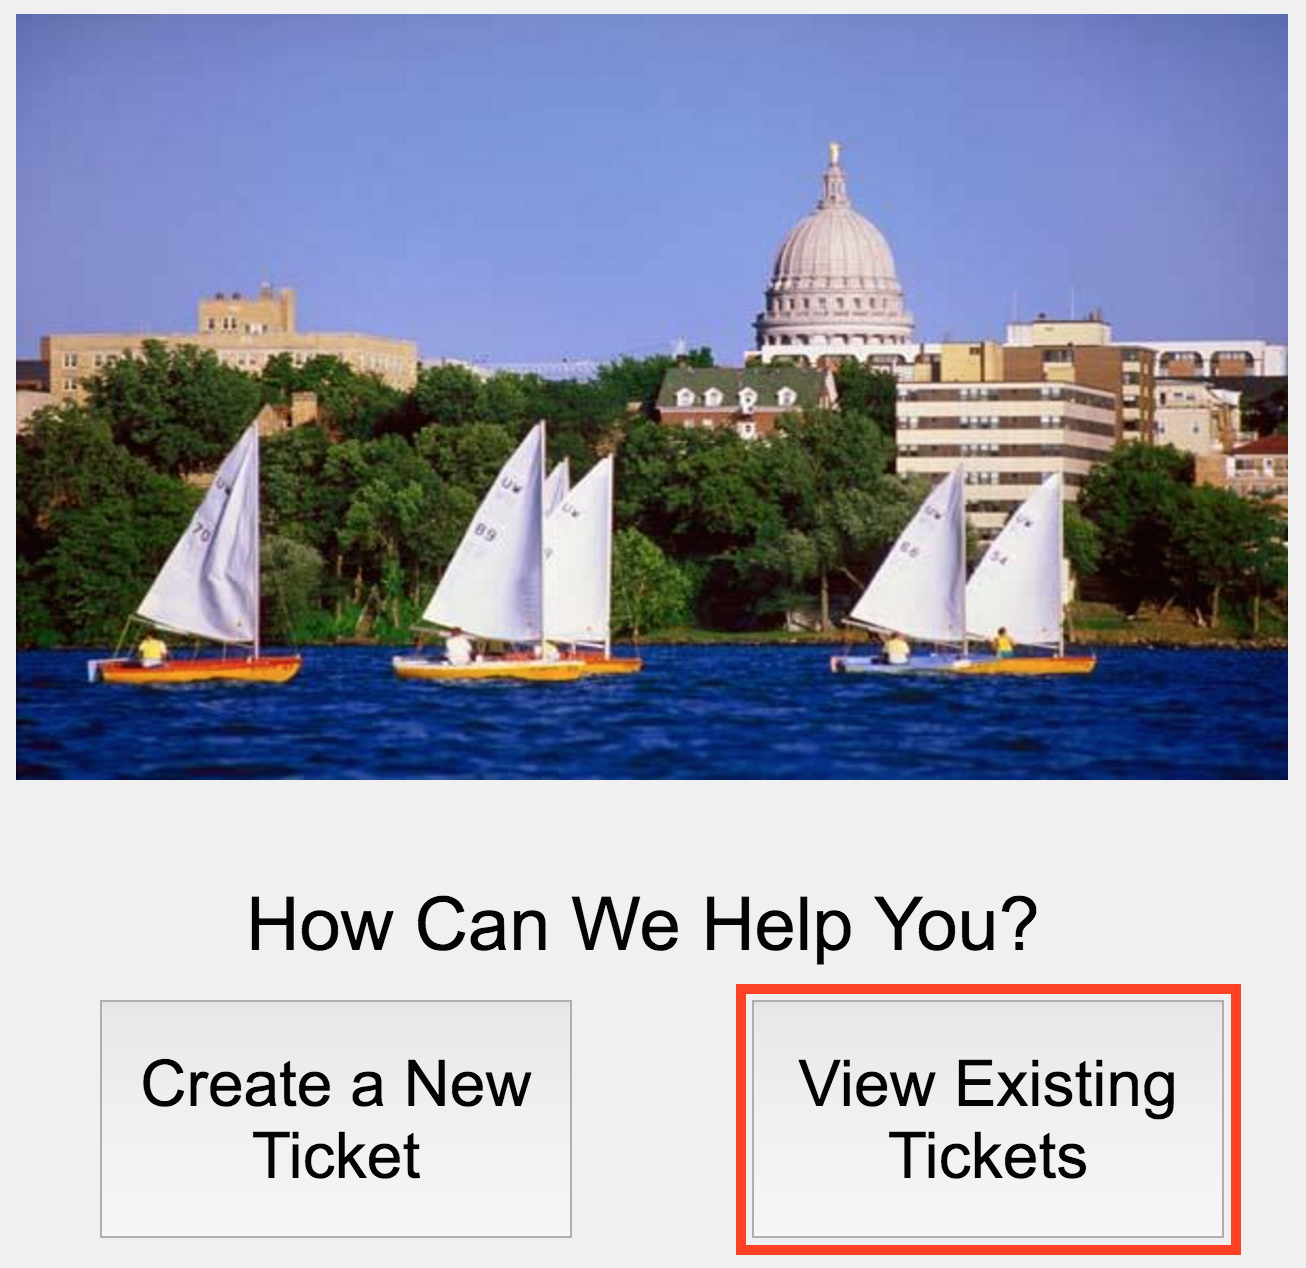 View existing tickets in portal